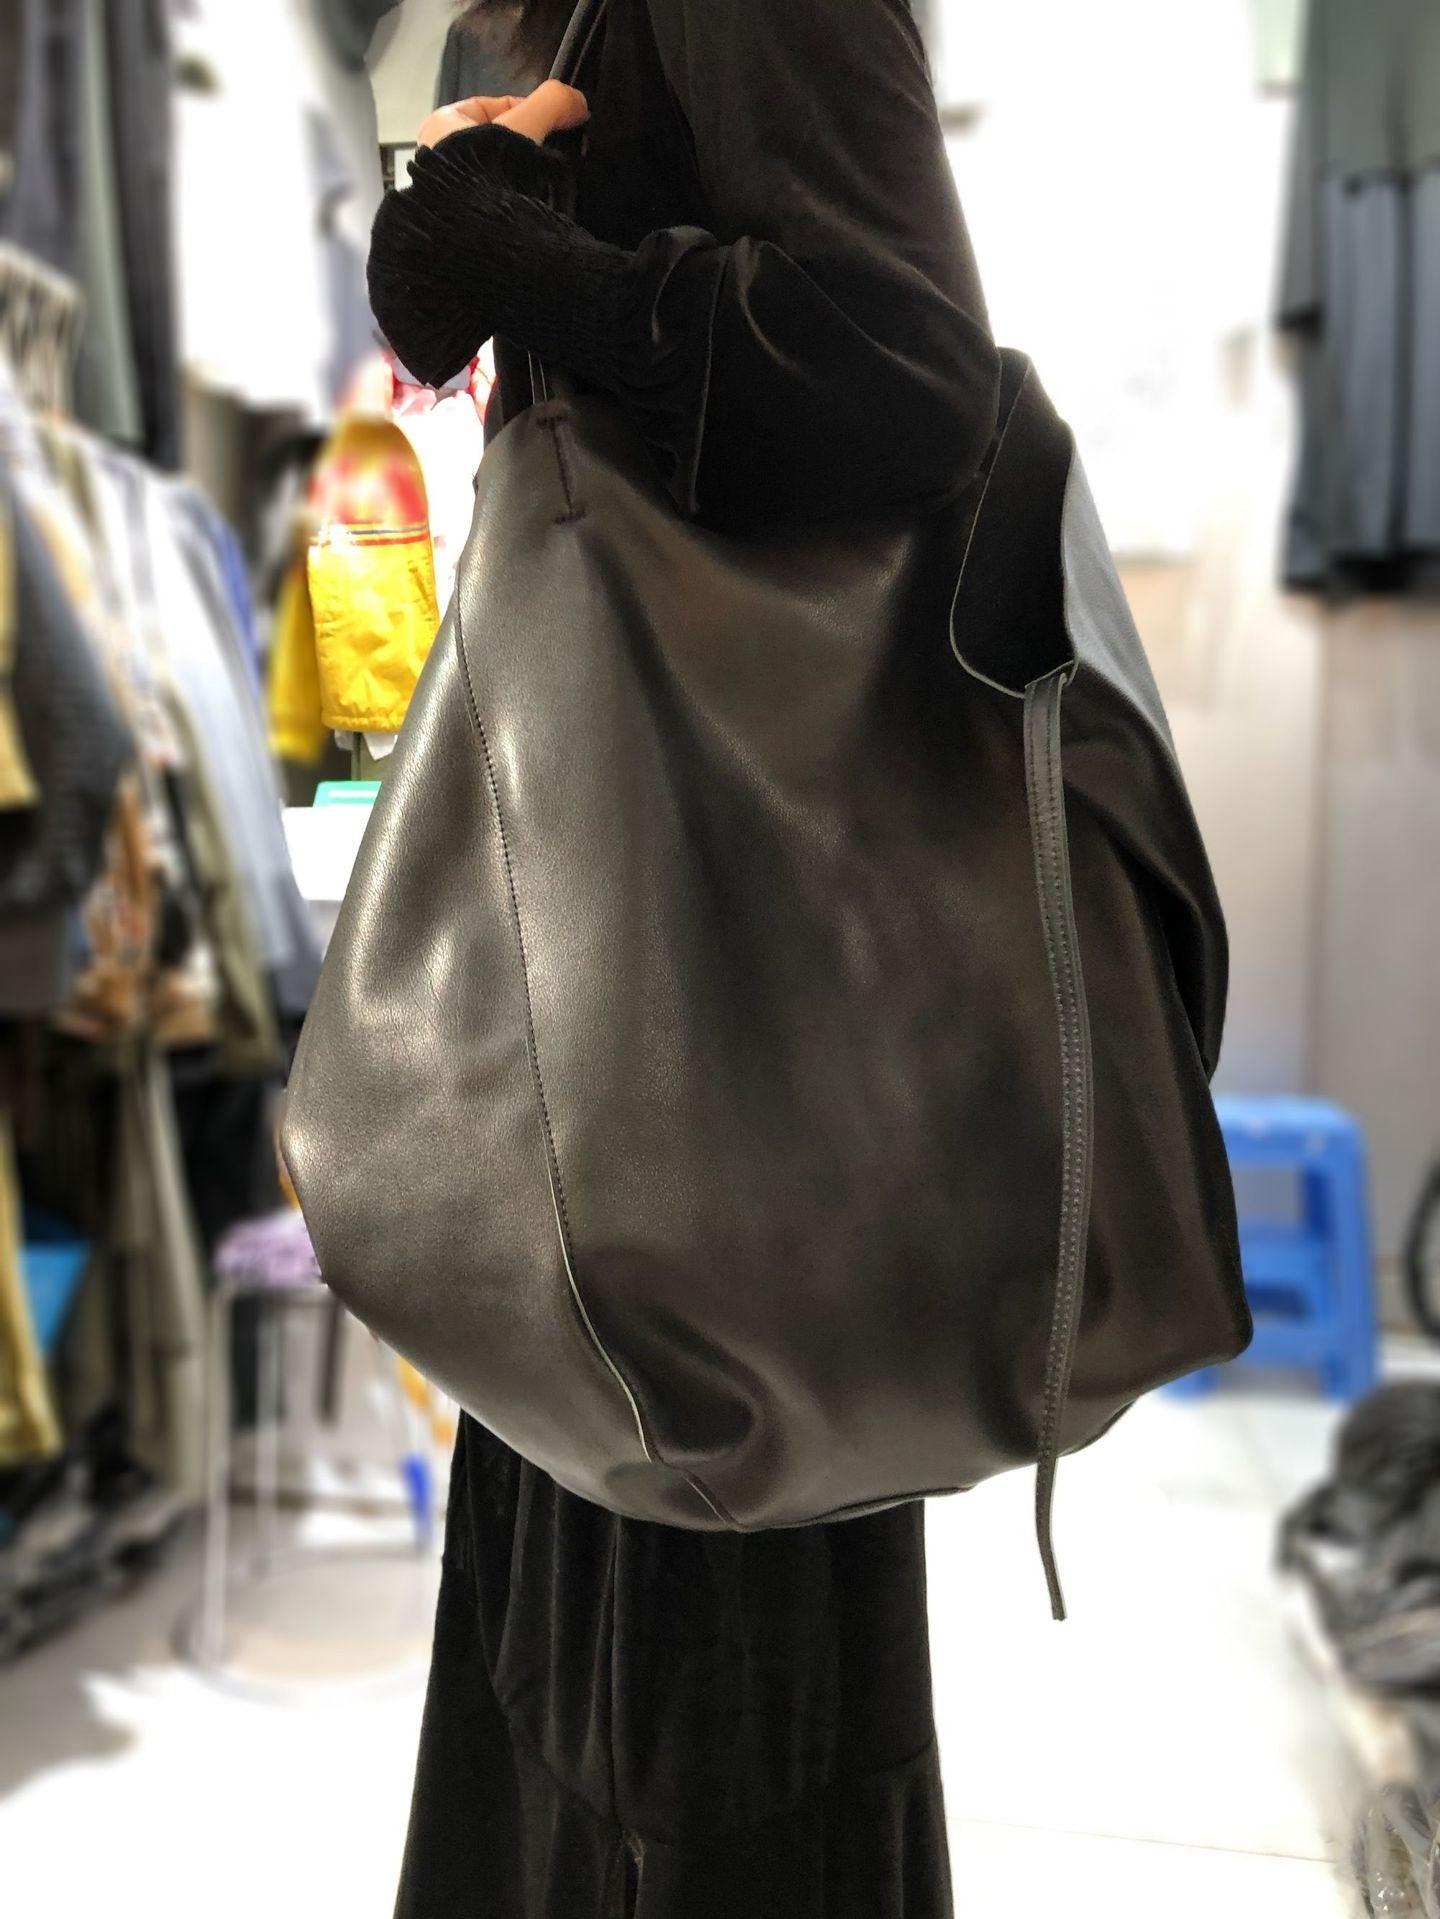 OVERSIZED TOTE, Large Slouchy Tote, Black Handbag for Women, Full Grain Leather Bag, Every Day Bag, Leather carry on, Handcrafted Bag